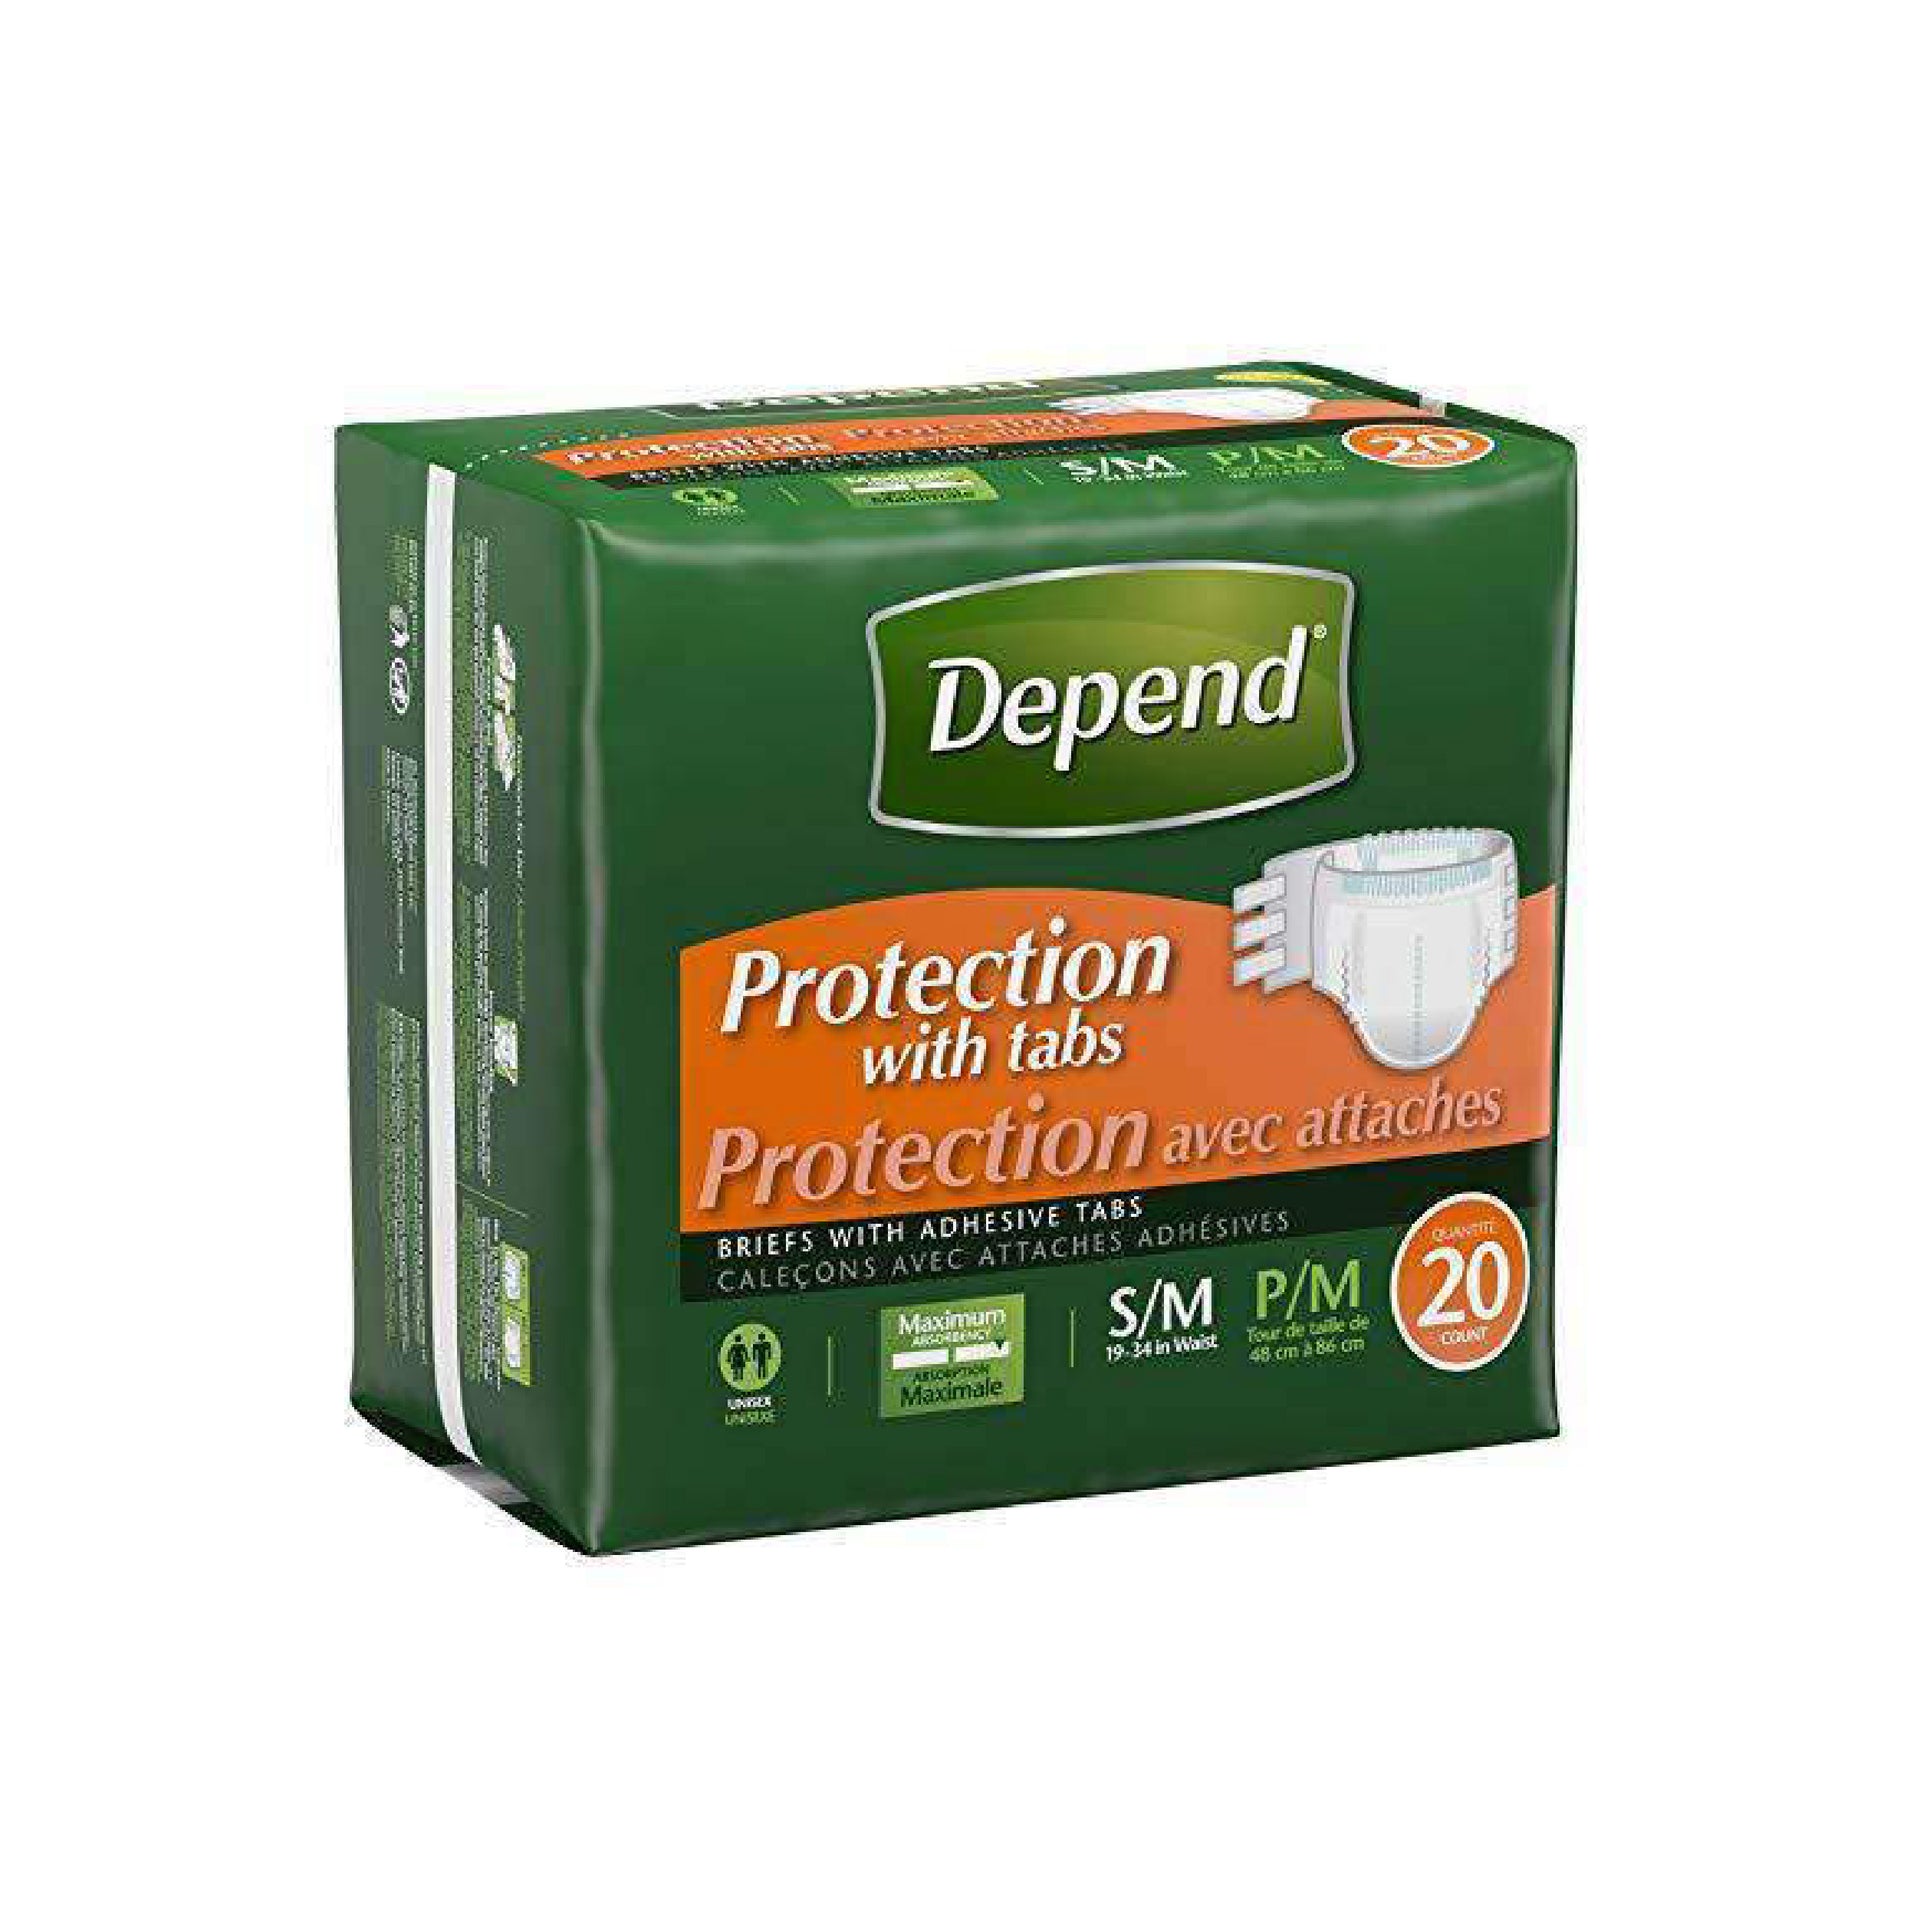 Depend Brand Incontinence